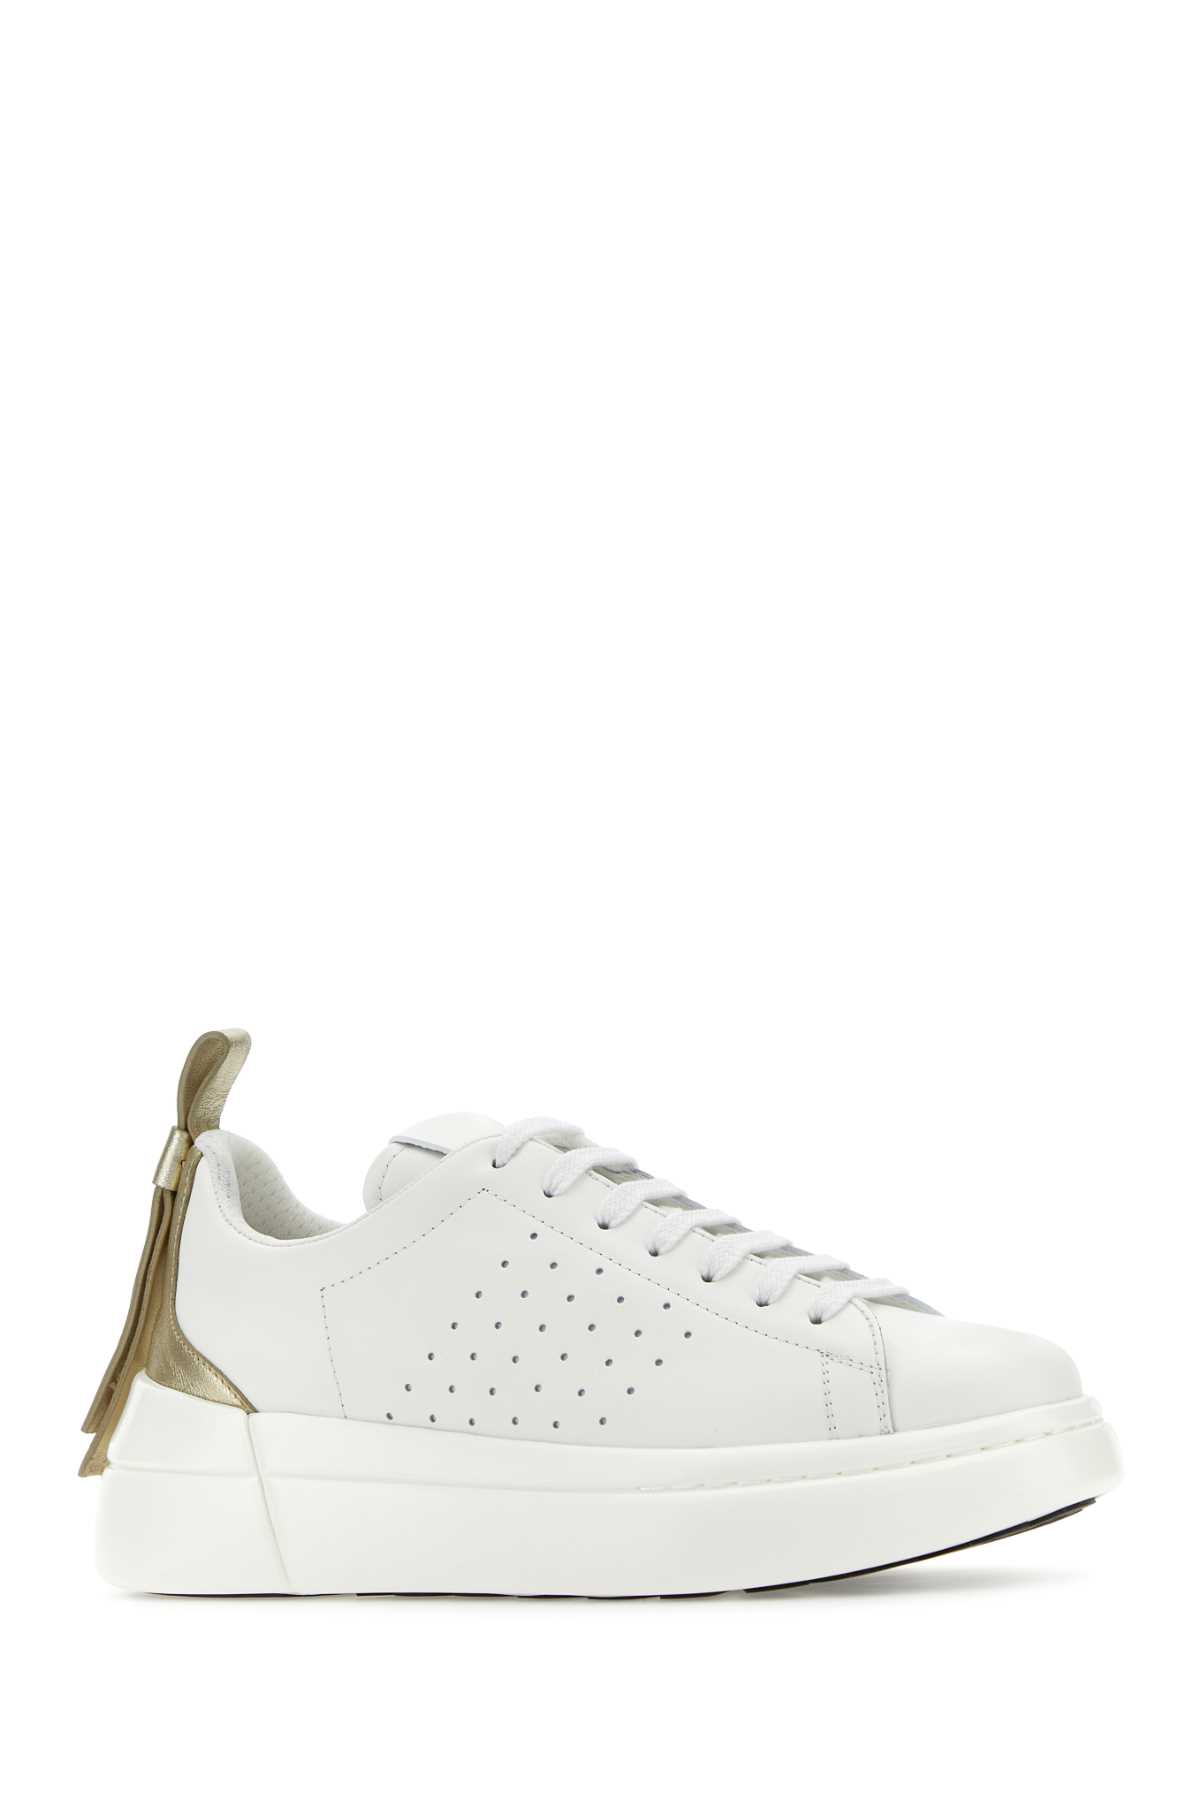 Red Valentino White Leather Bowalk Sneakers In Biancoplatino